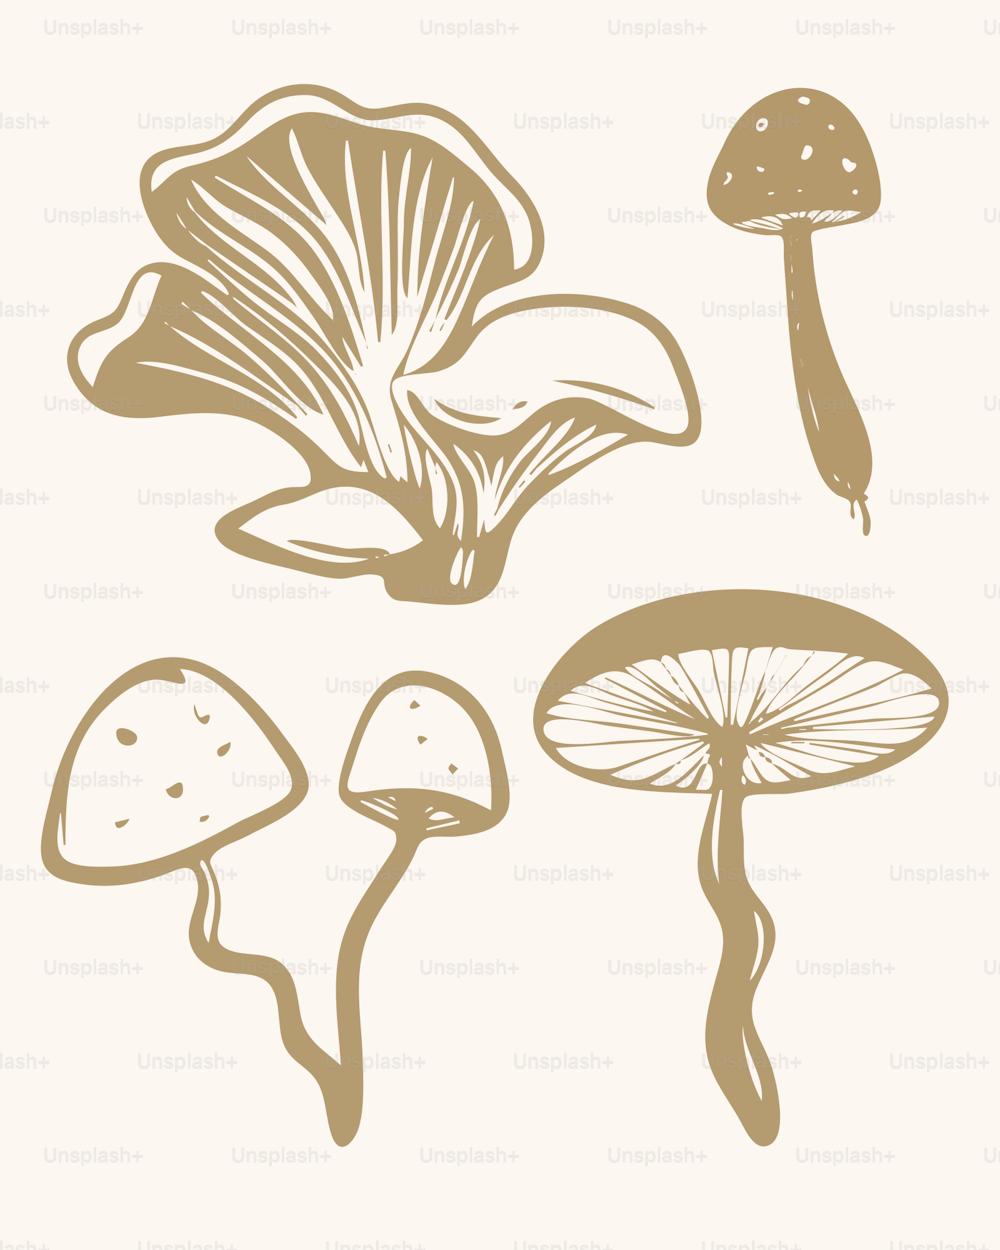 a group of mushrooms on a white background